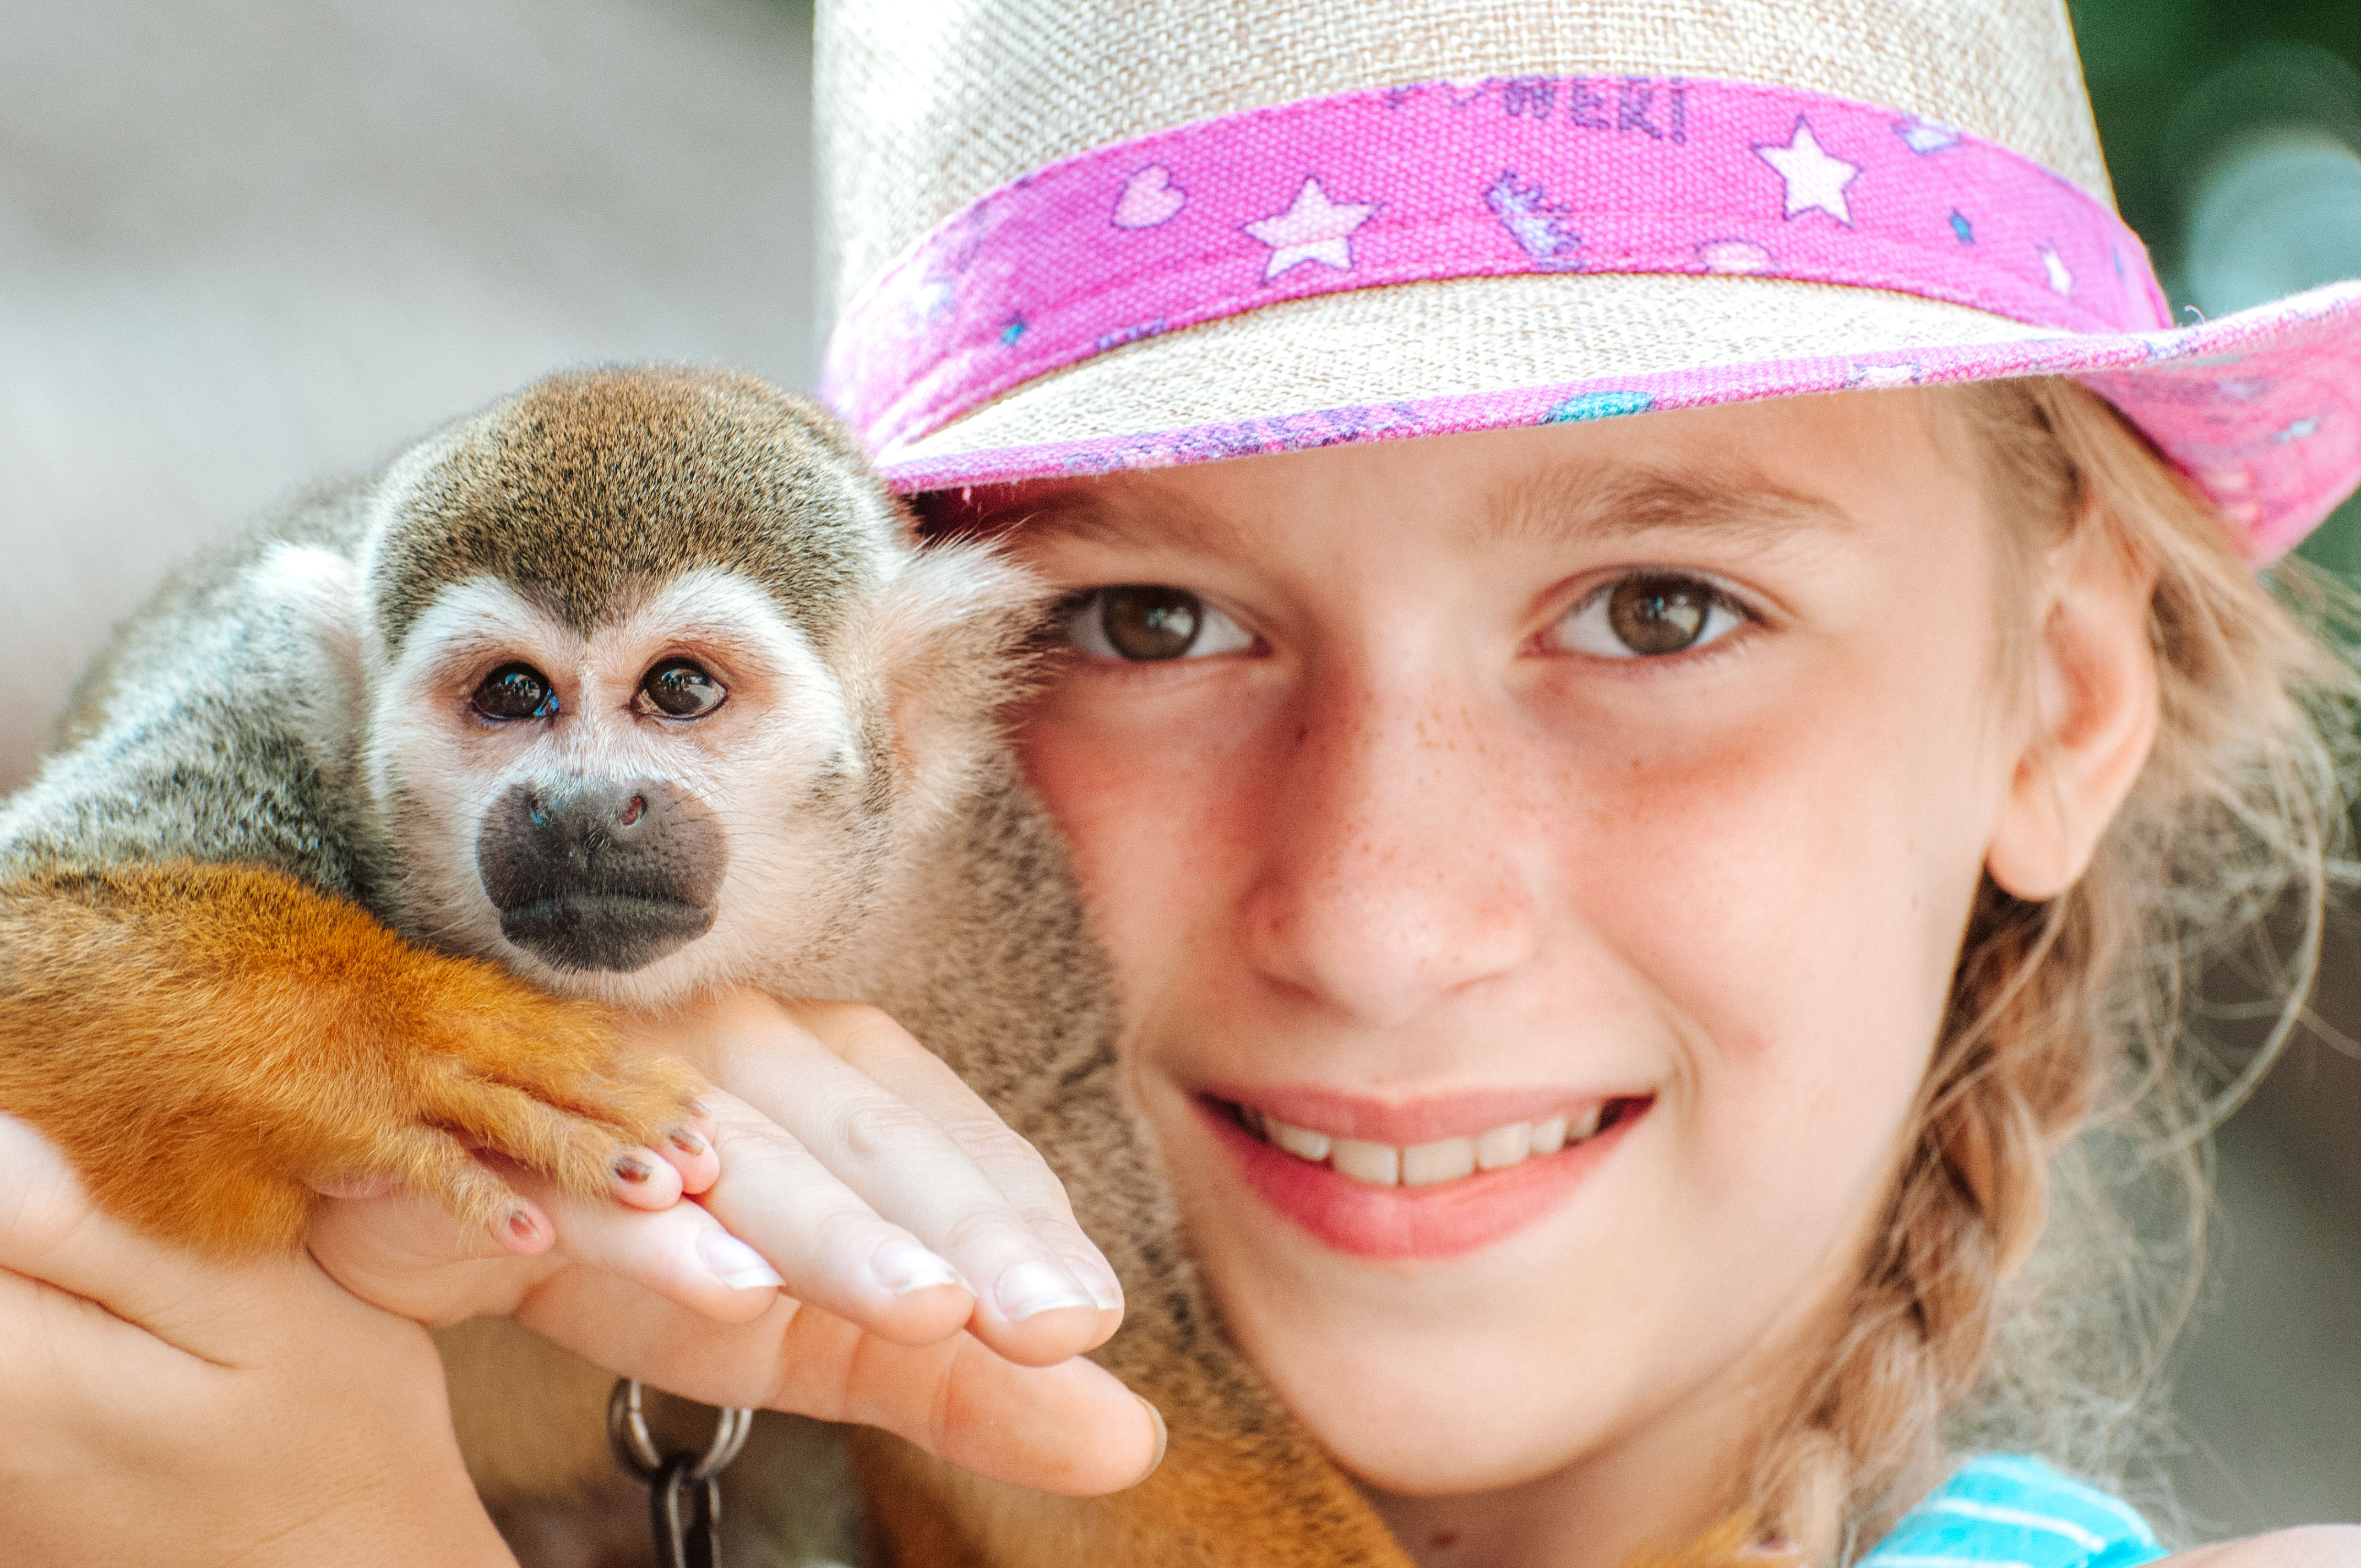 A young girl smiles as she holds a small monkey on her shoulder while wearing a pink-brimmed straw hat. The monkey is part of the various tourist attractions at the Pre-Colombian Mayan ruins of Tulum, Mexico, overlooking the Caribbean Sea on the Yucatan Peninsula.